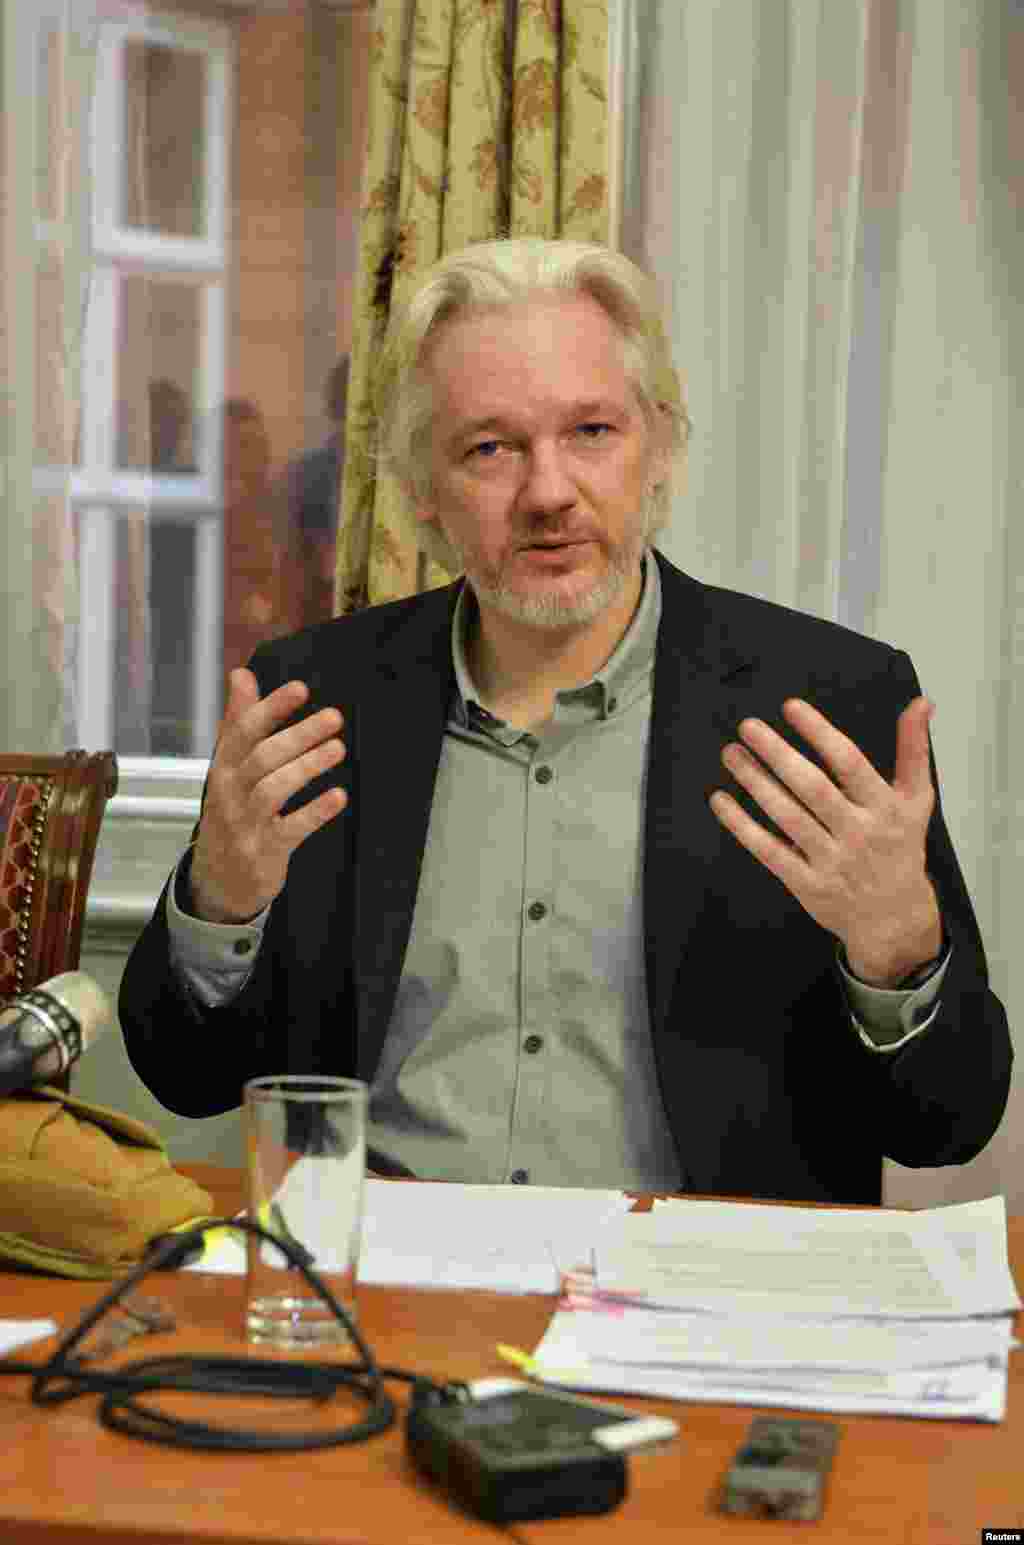 WikiLeaks founder Julian Assange gestures during a news conference at the Ecuadorian embassy, in central London, Aug. 18, 2014.